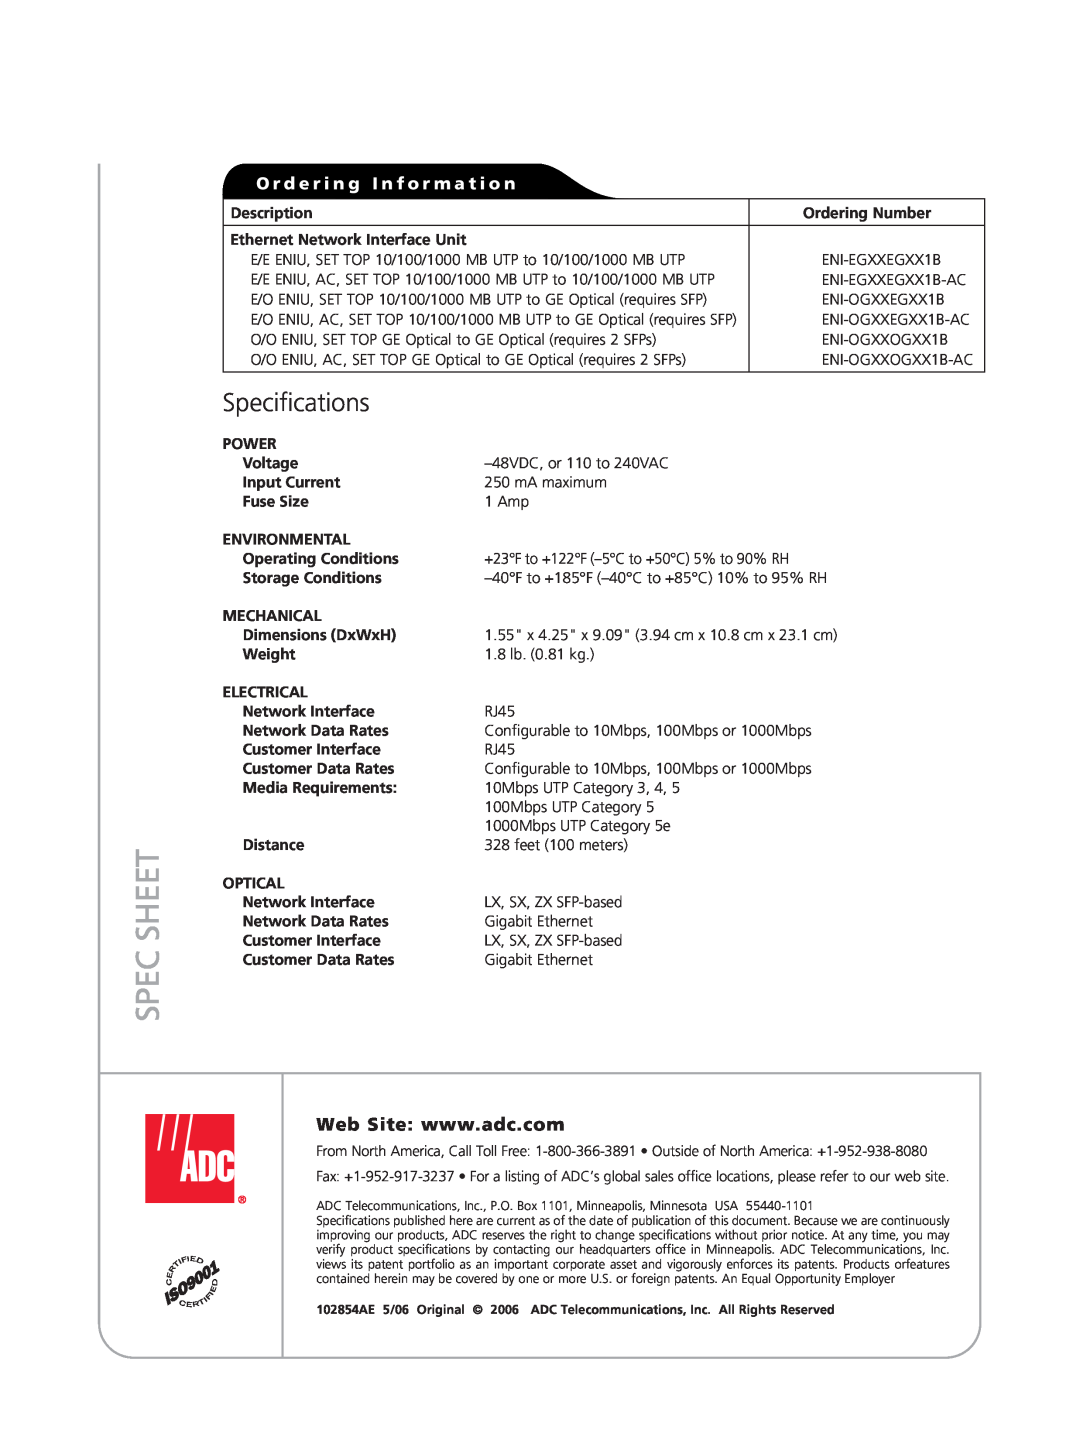 ADC Ethernet Network Interface Unit manual Specifications, Spec Sheet, O r d e r i n g I n f o r m a t i o n 